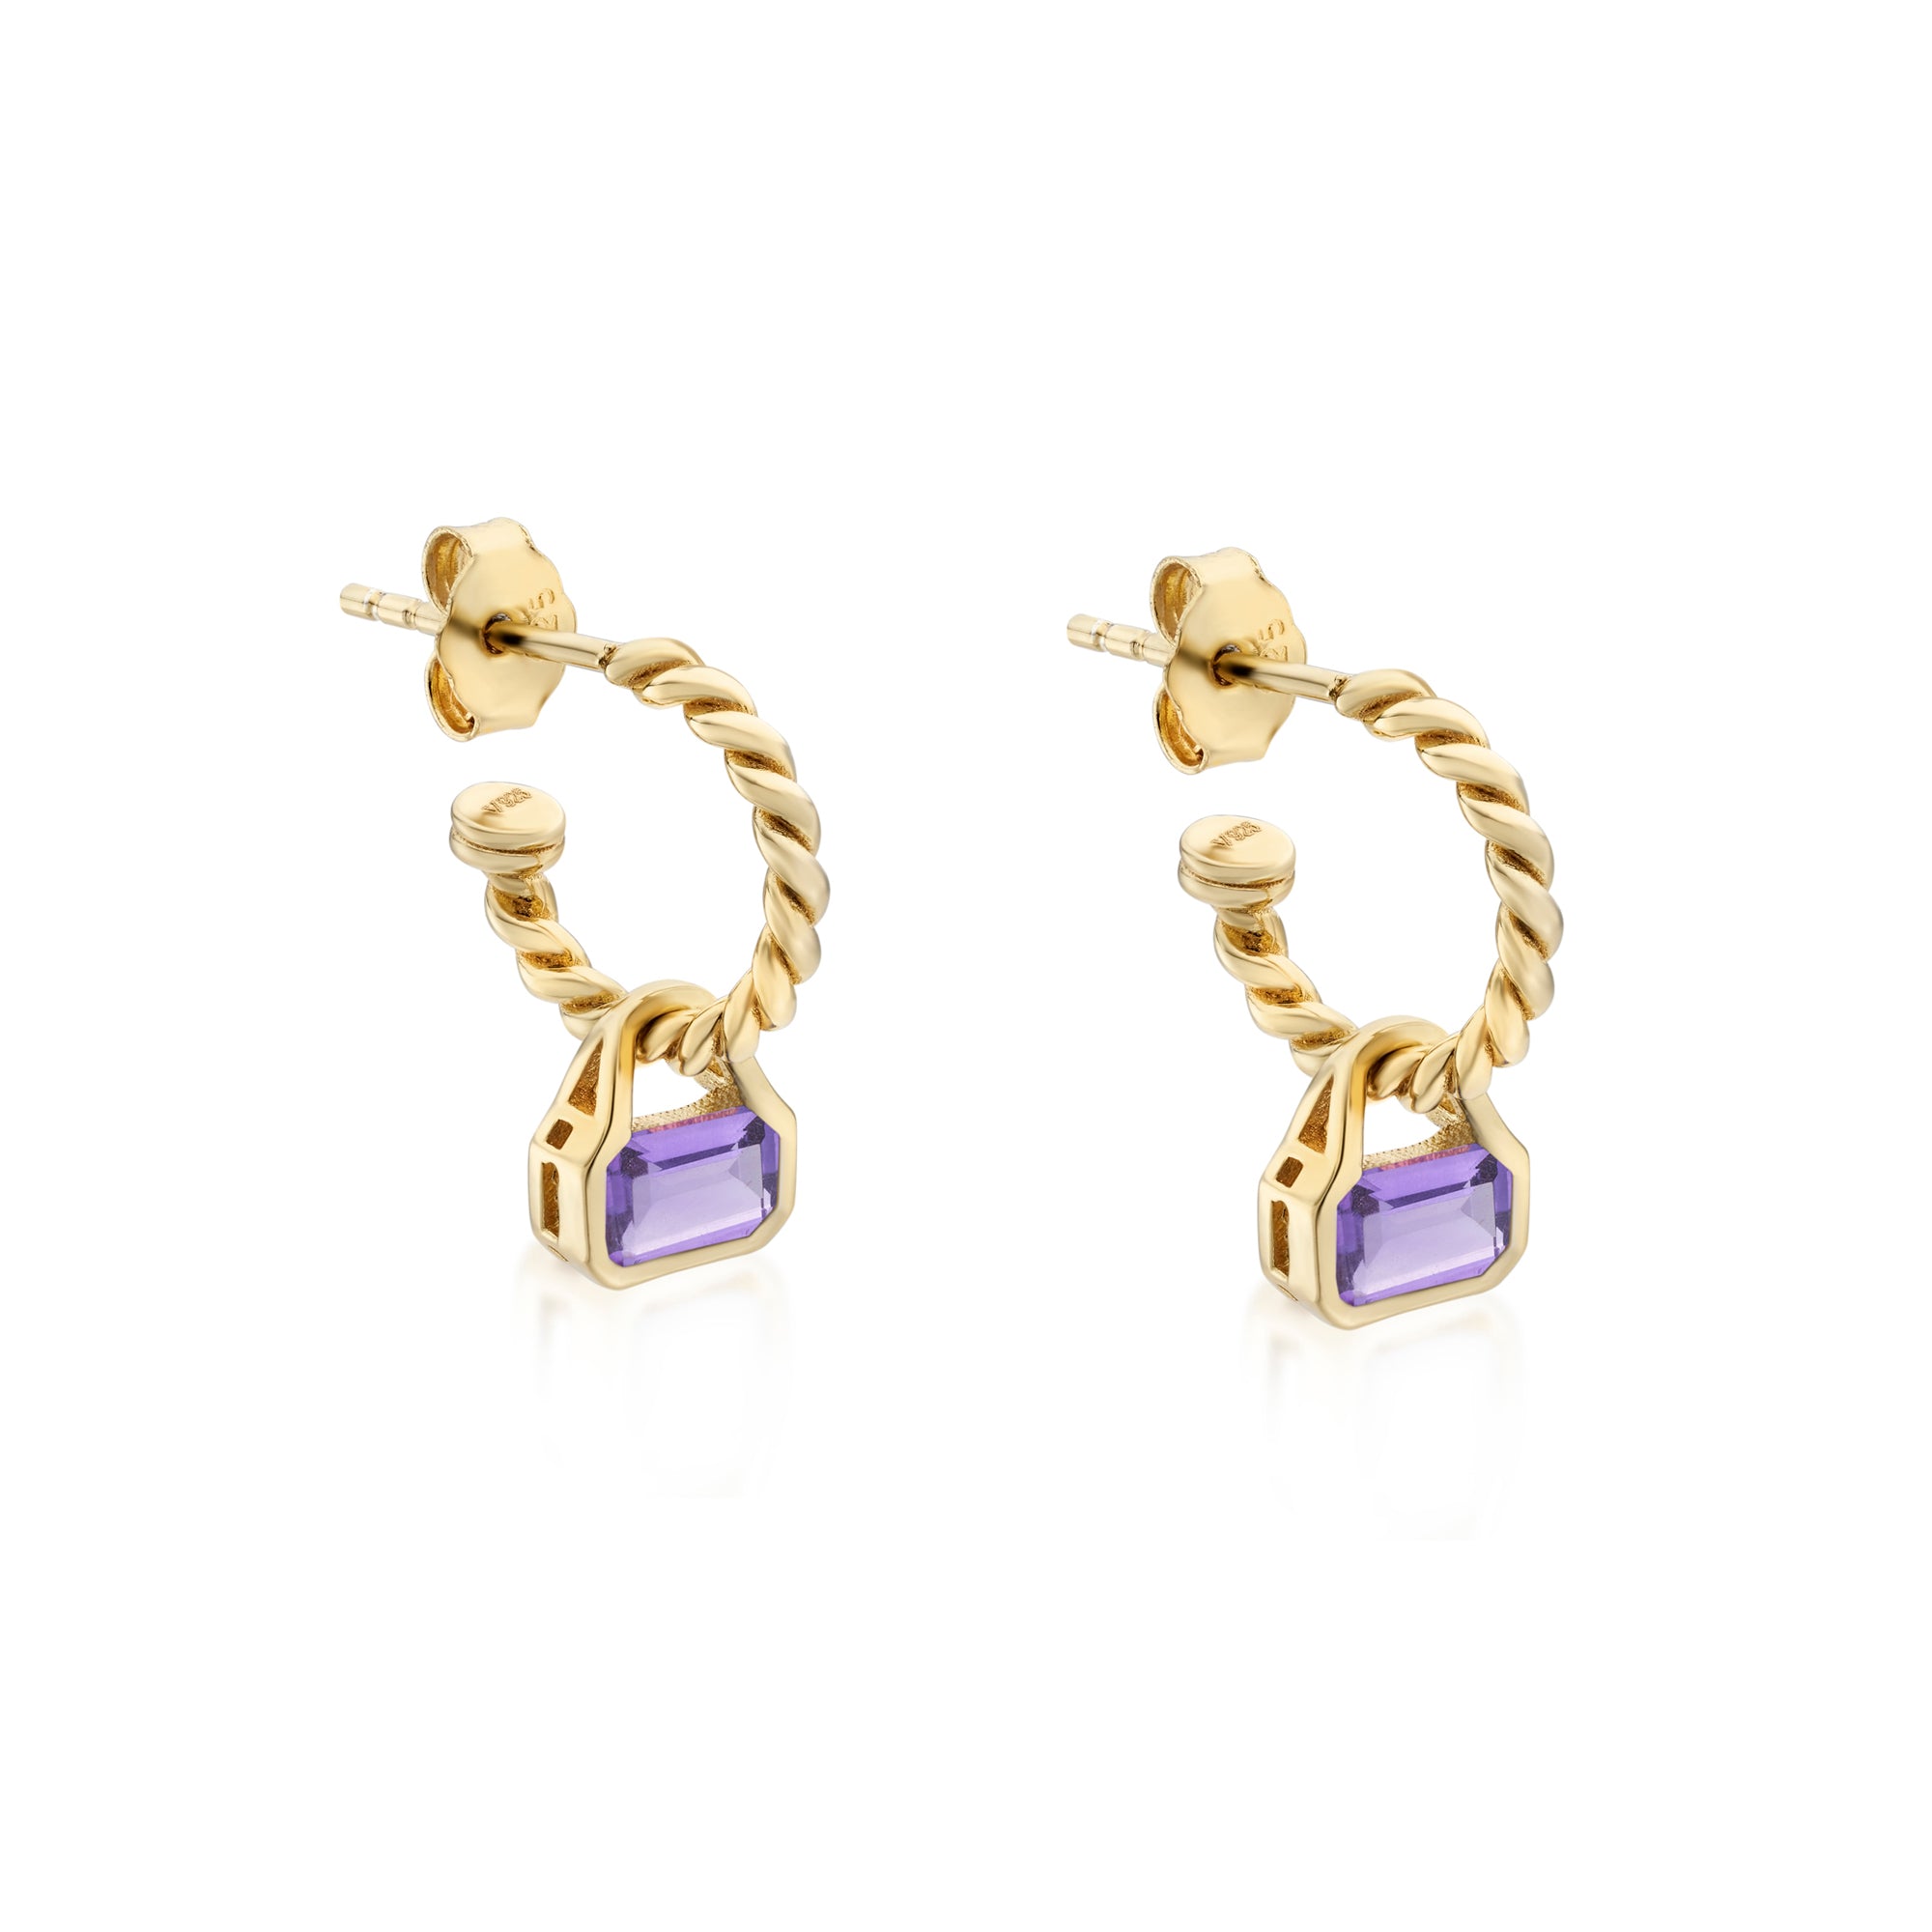 Amethyst Charms (February) on Twisted Hoops